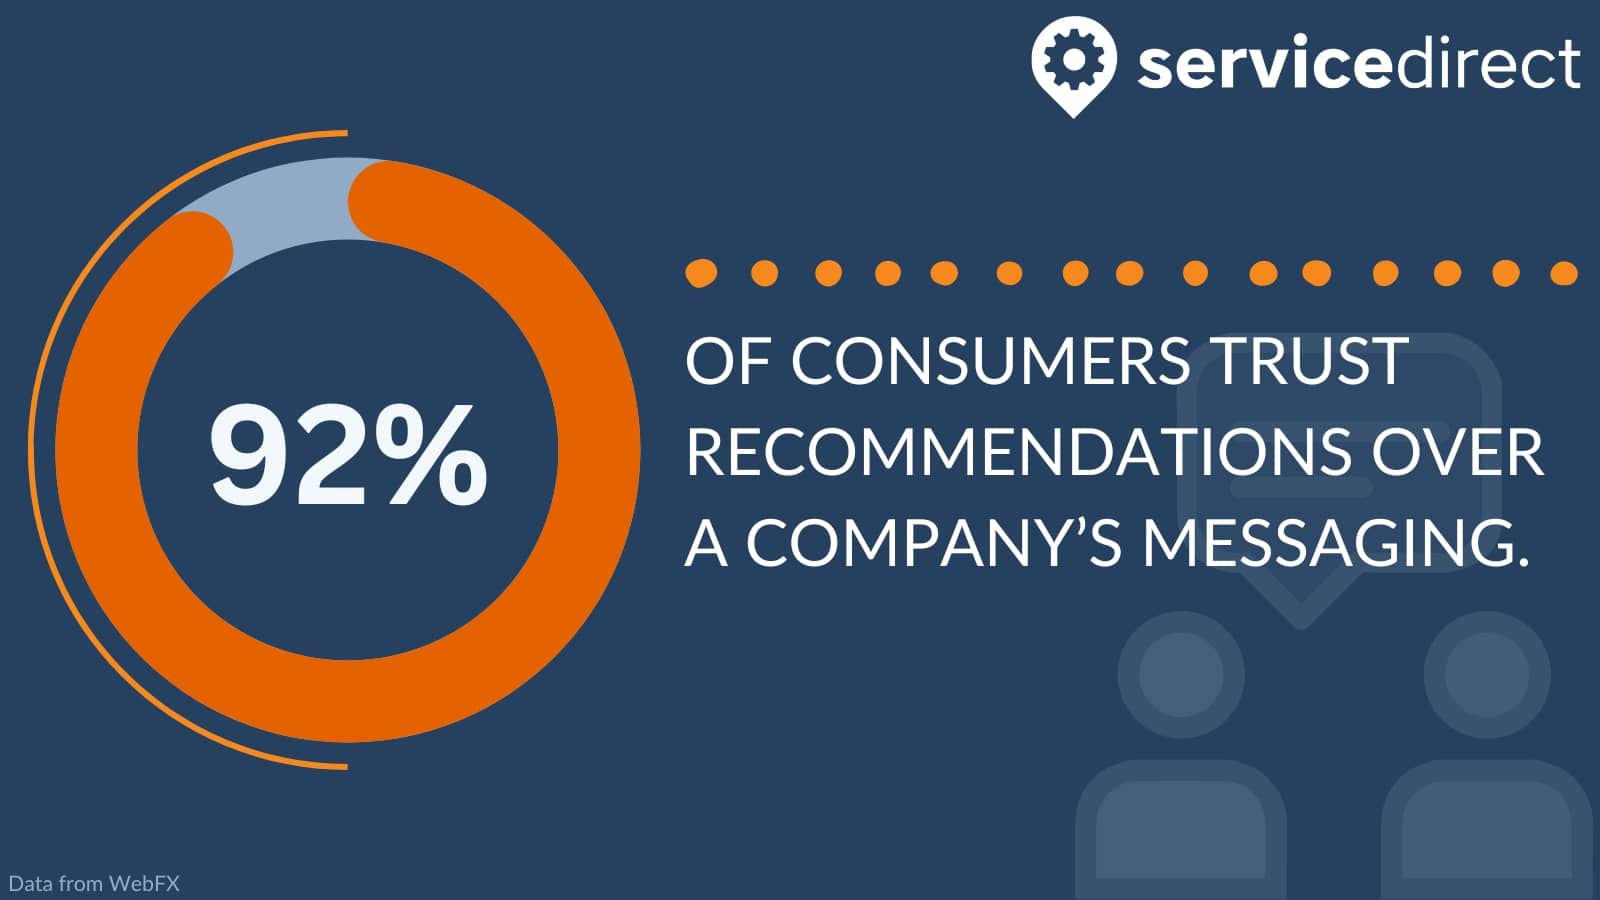 92% of consumers trust recommendations over a company's messaging 